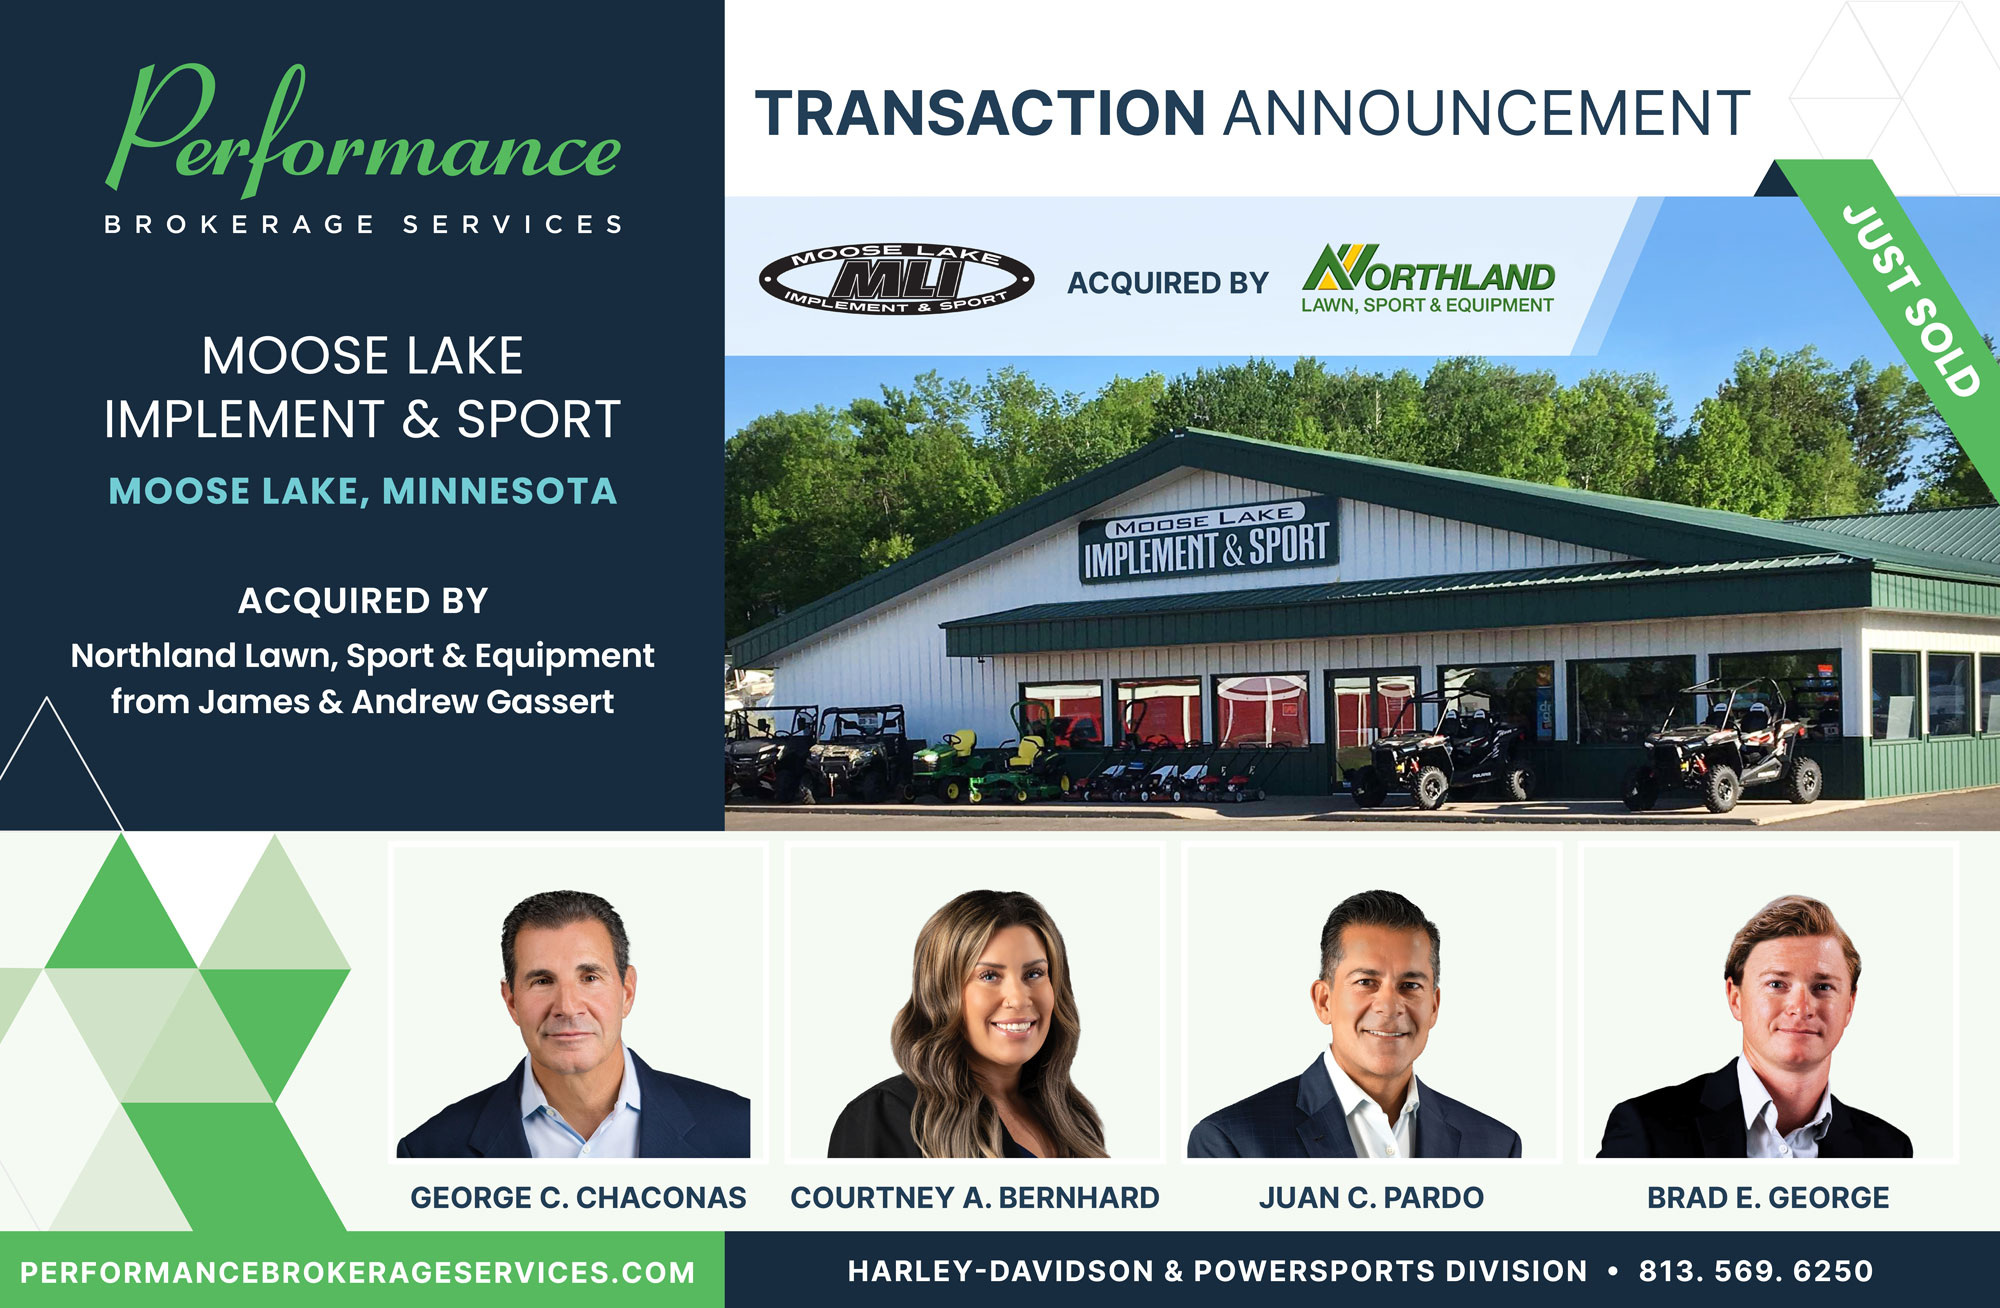 Moose Lake Implement & Sport sells to Northland Lawn, Sport & Equipment with Performance Brokerage